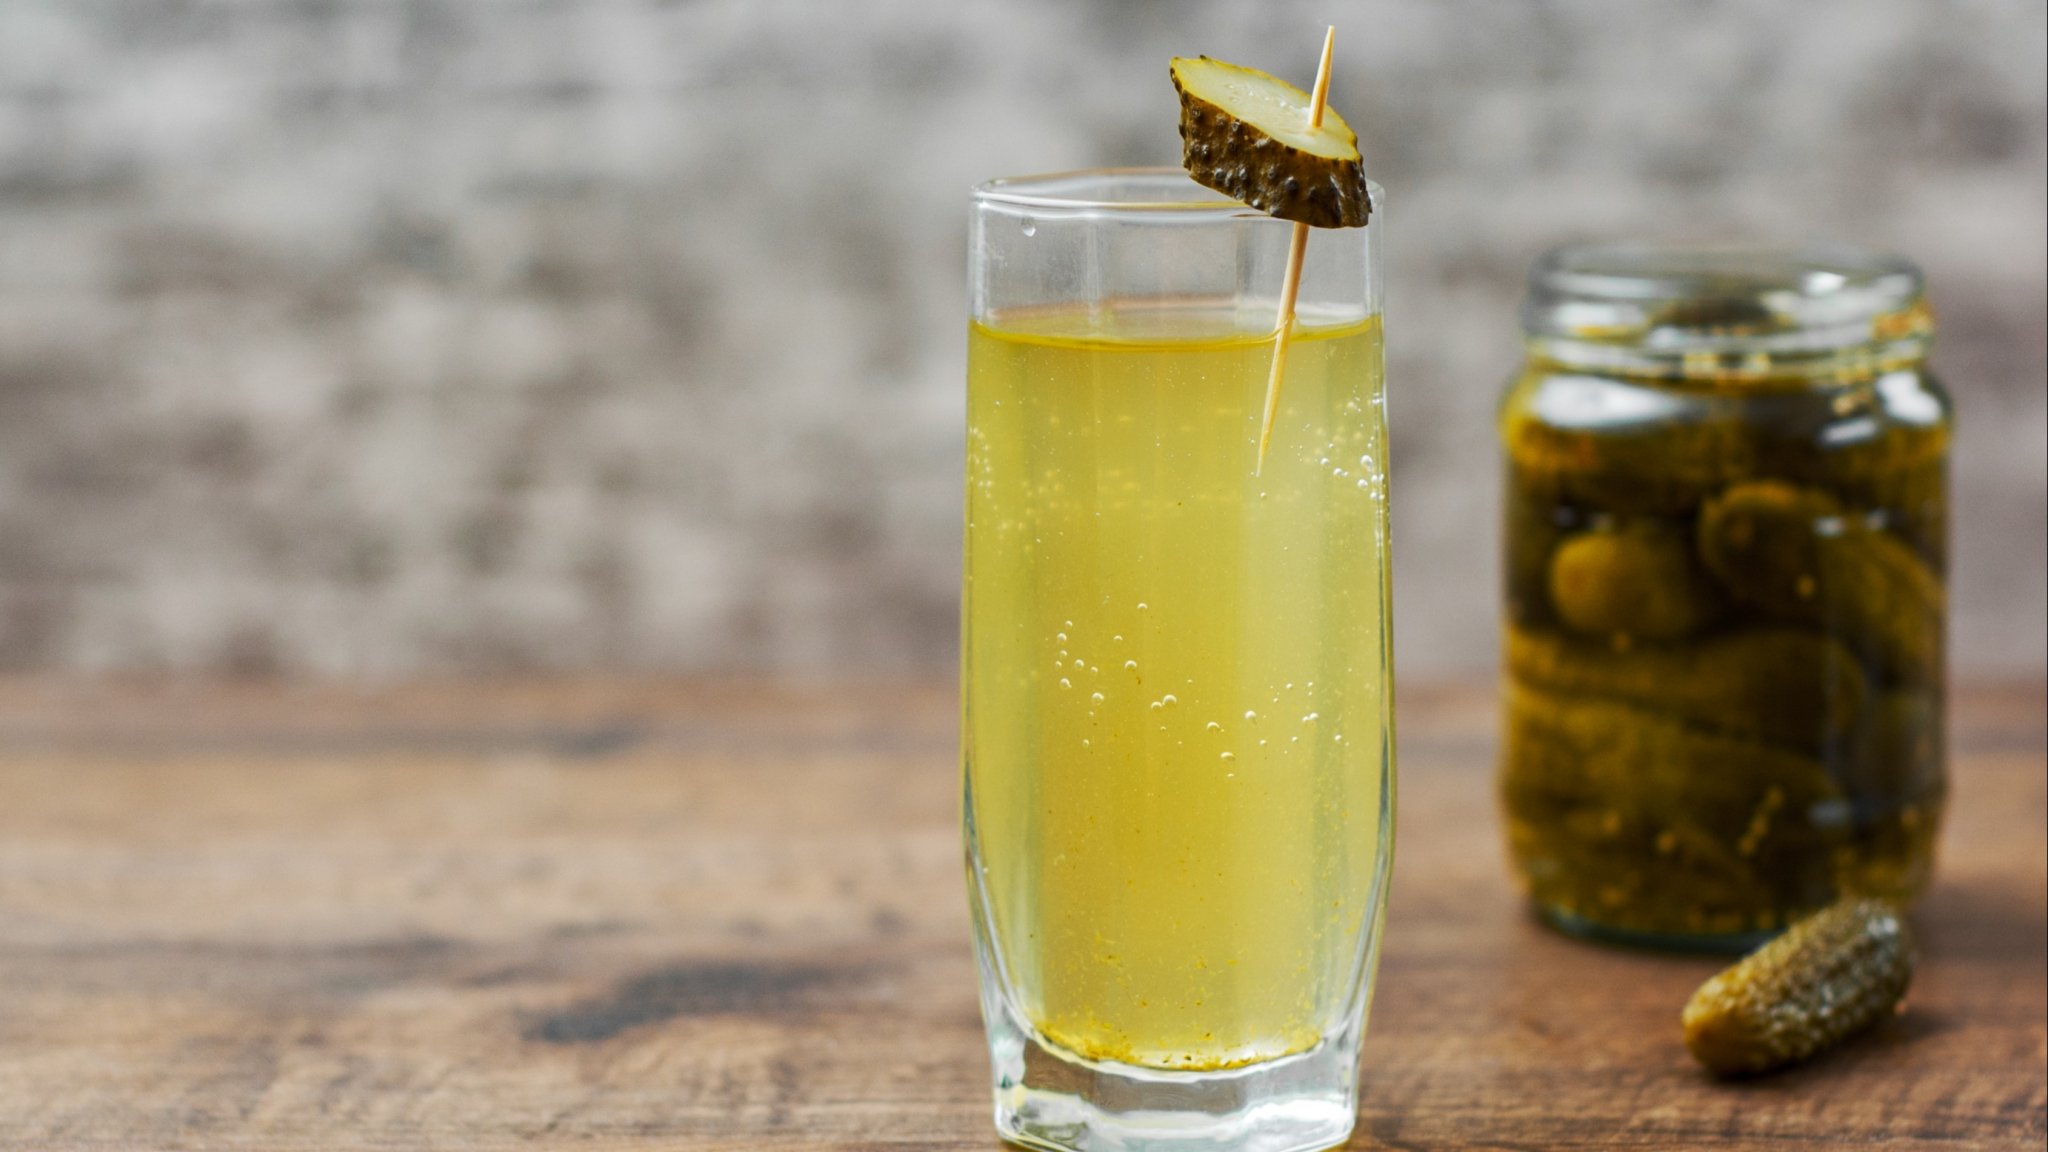 I Drank A Shot Of Pickle Juice Every Single Day. At The End Of 7 Days, Here's How I Felt